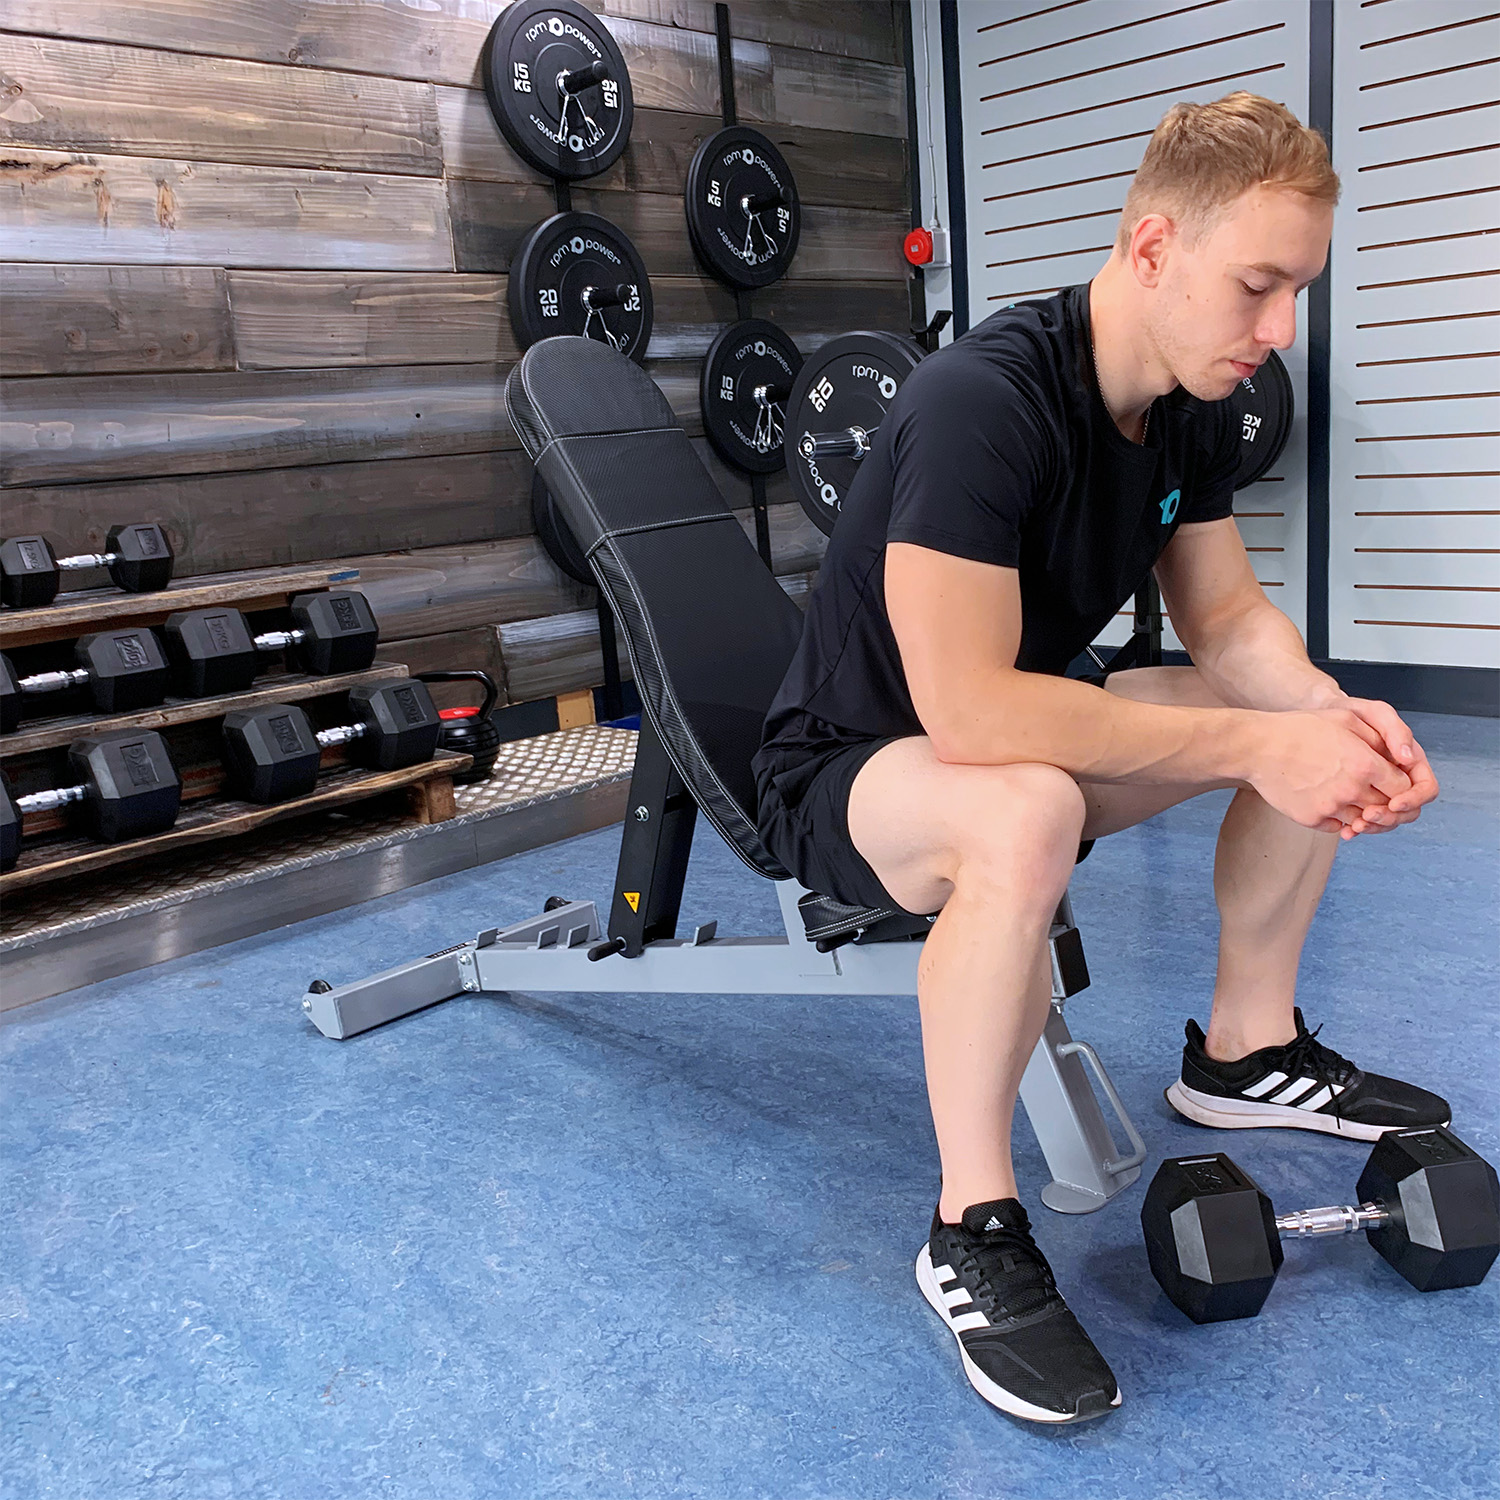 Man sitting on weight bench with dumbbell at his feet and behind him